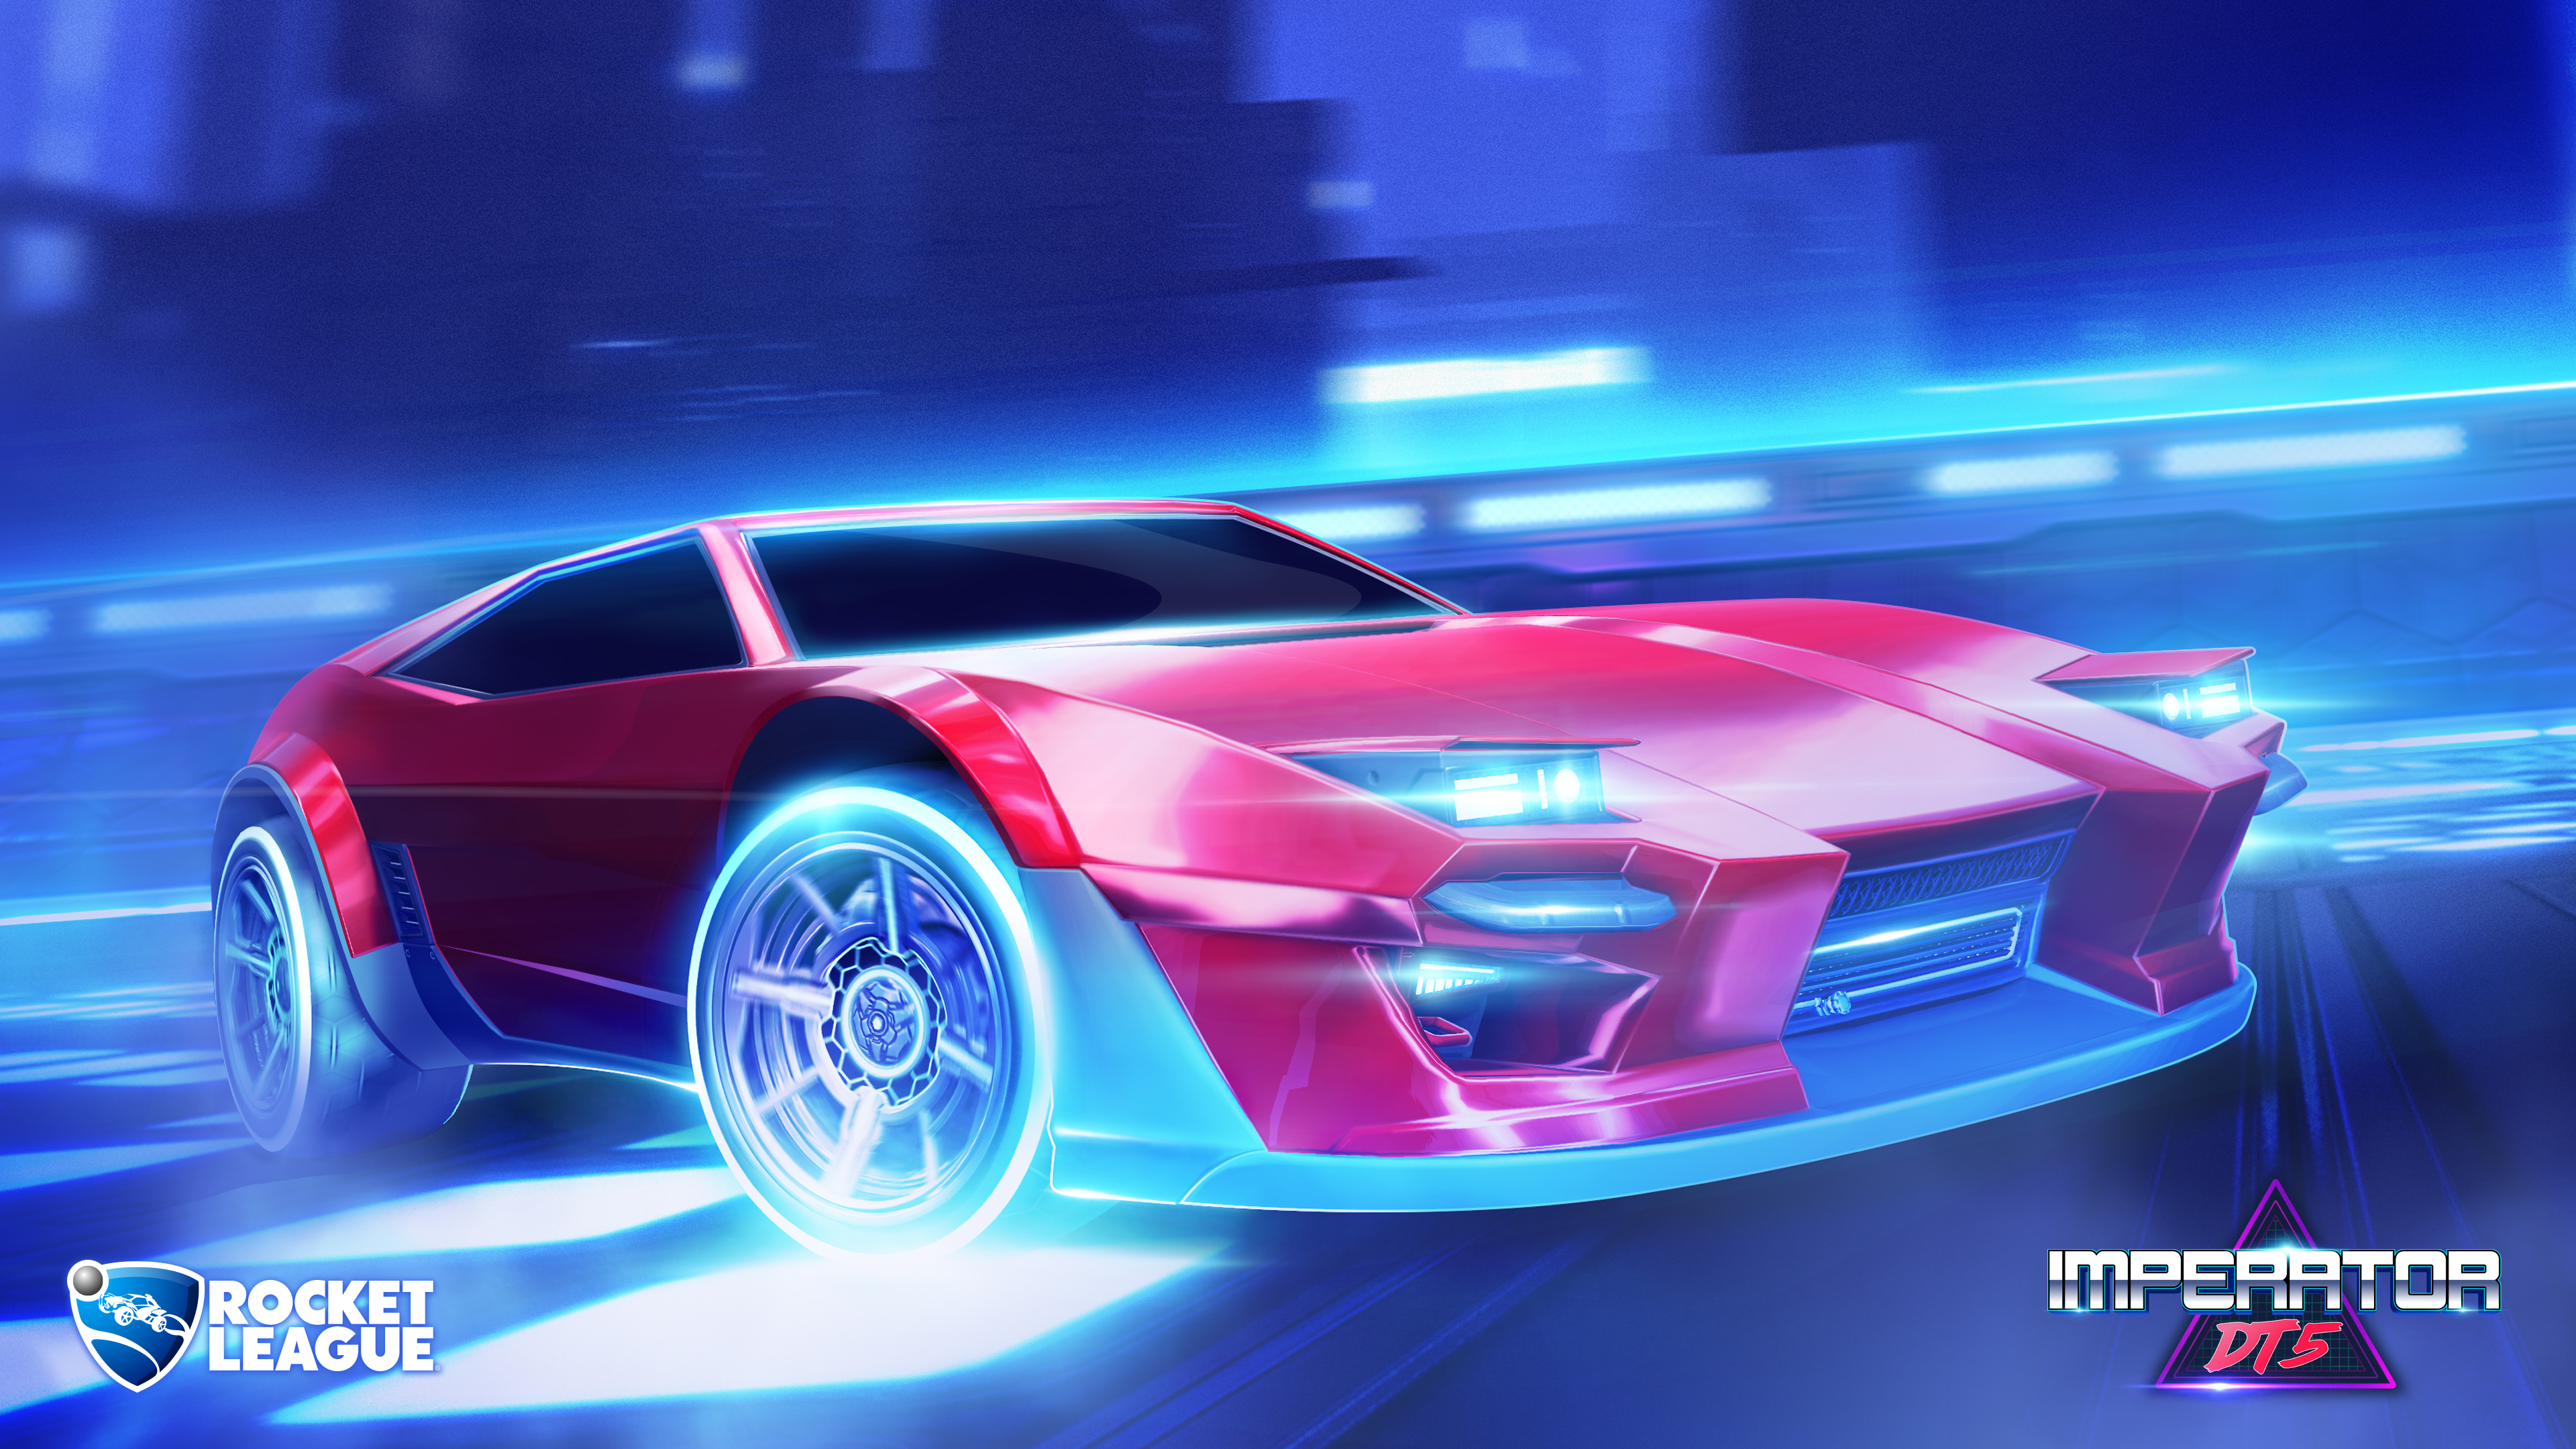 3840x2160 120+ Rocket League HD Wallpapers and Backgrounds